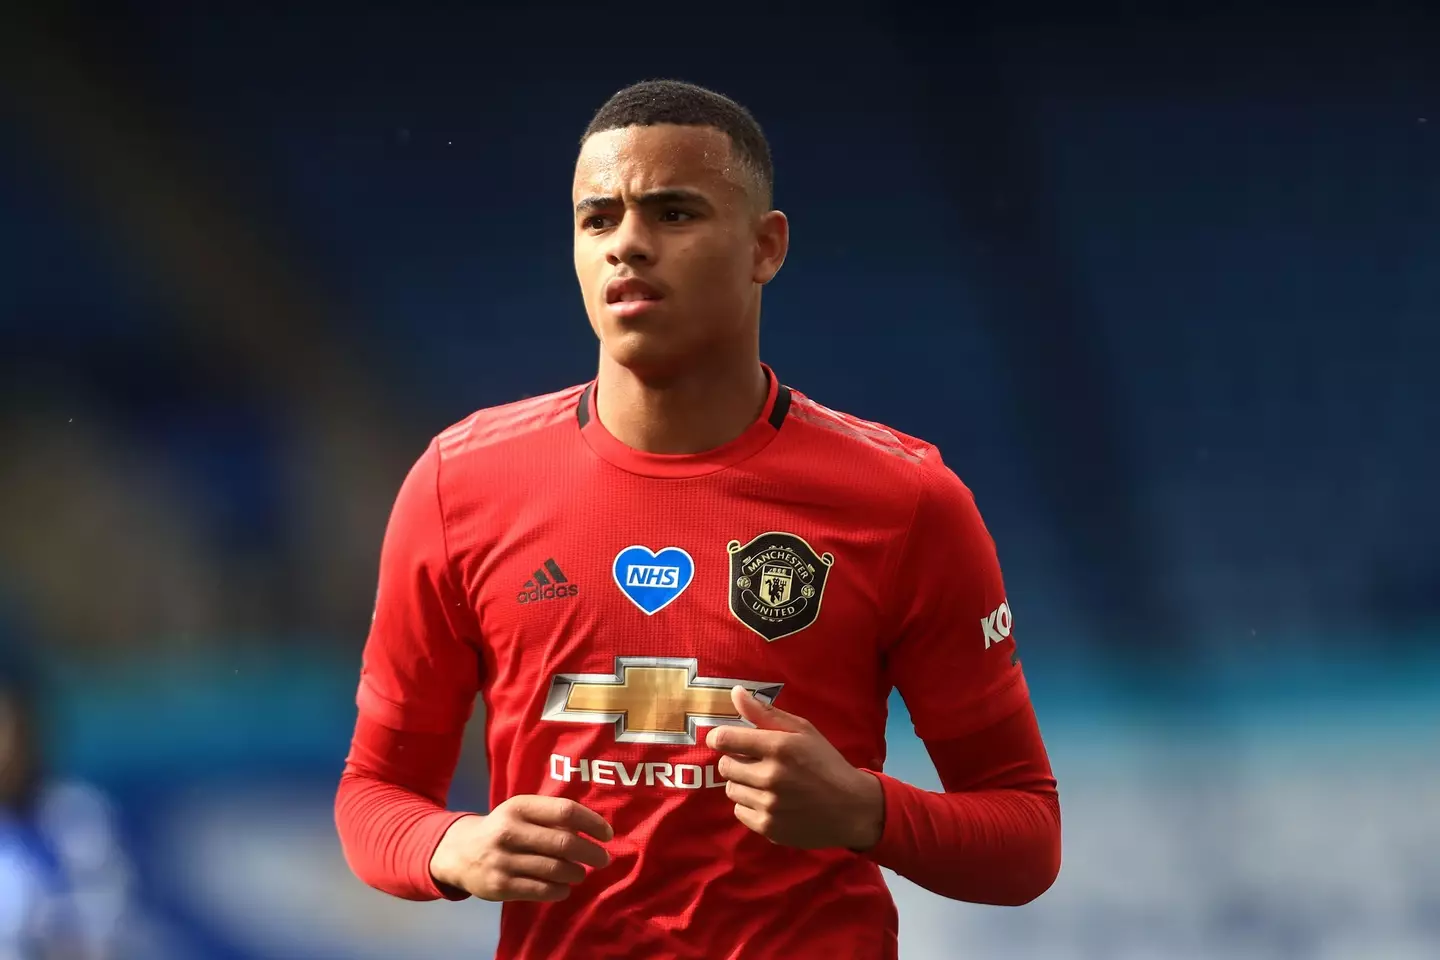 Charges made against Mason Greenwood have been dropped.